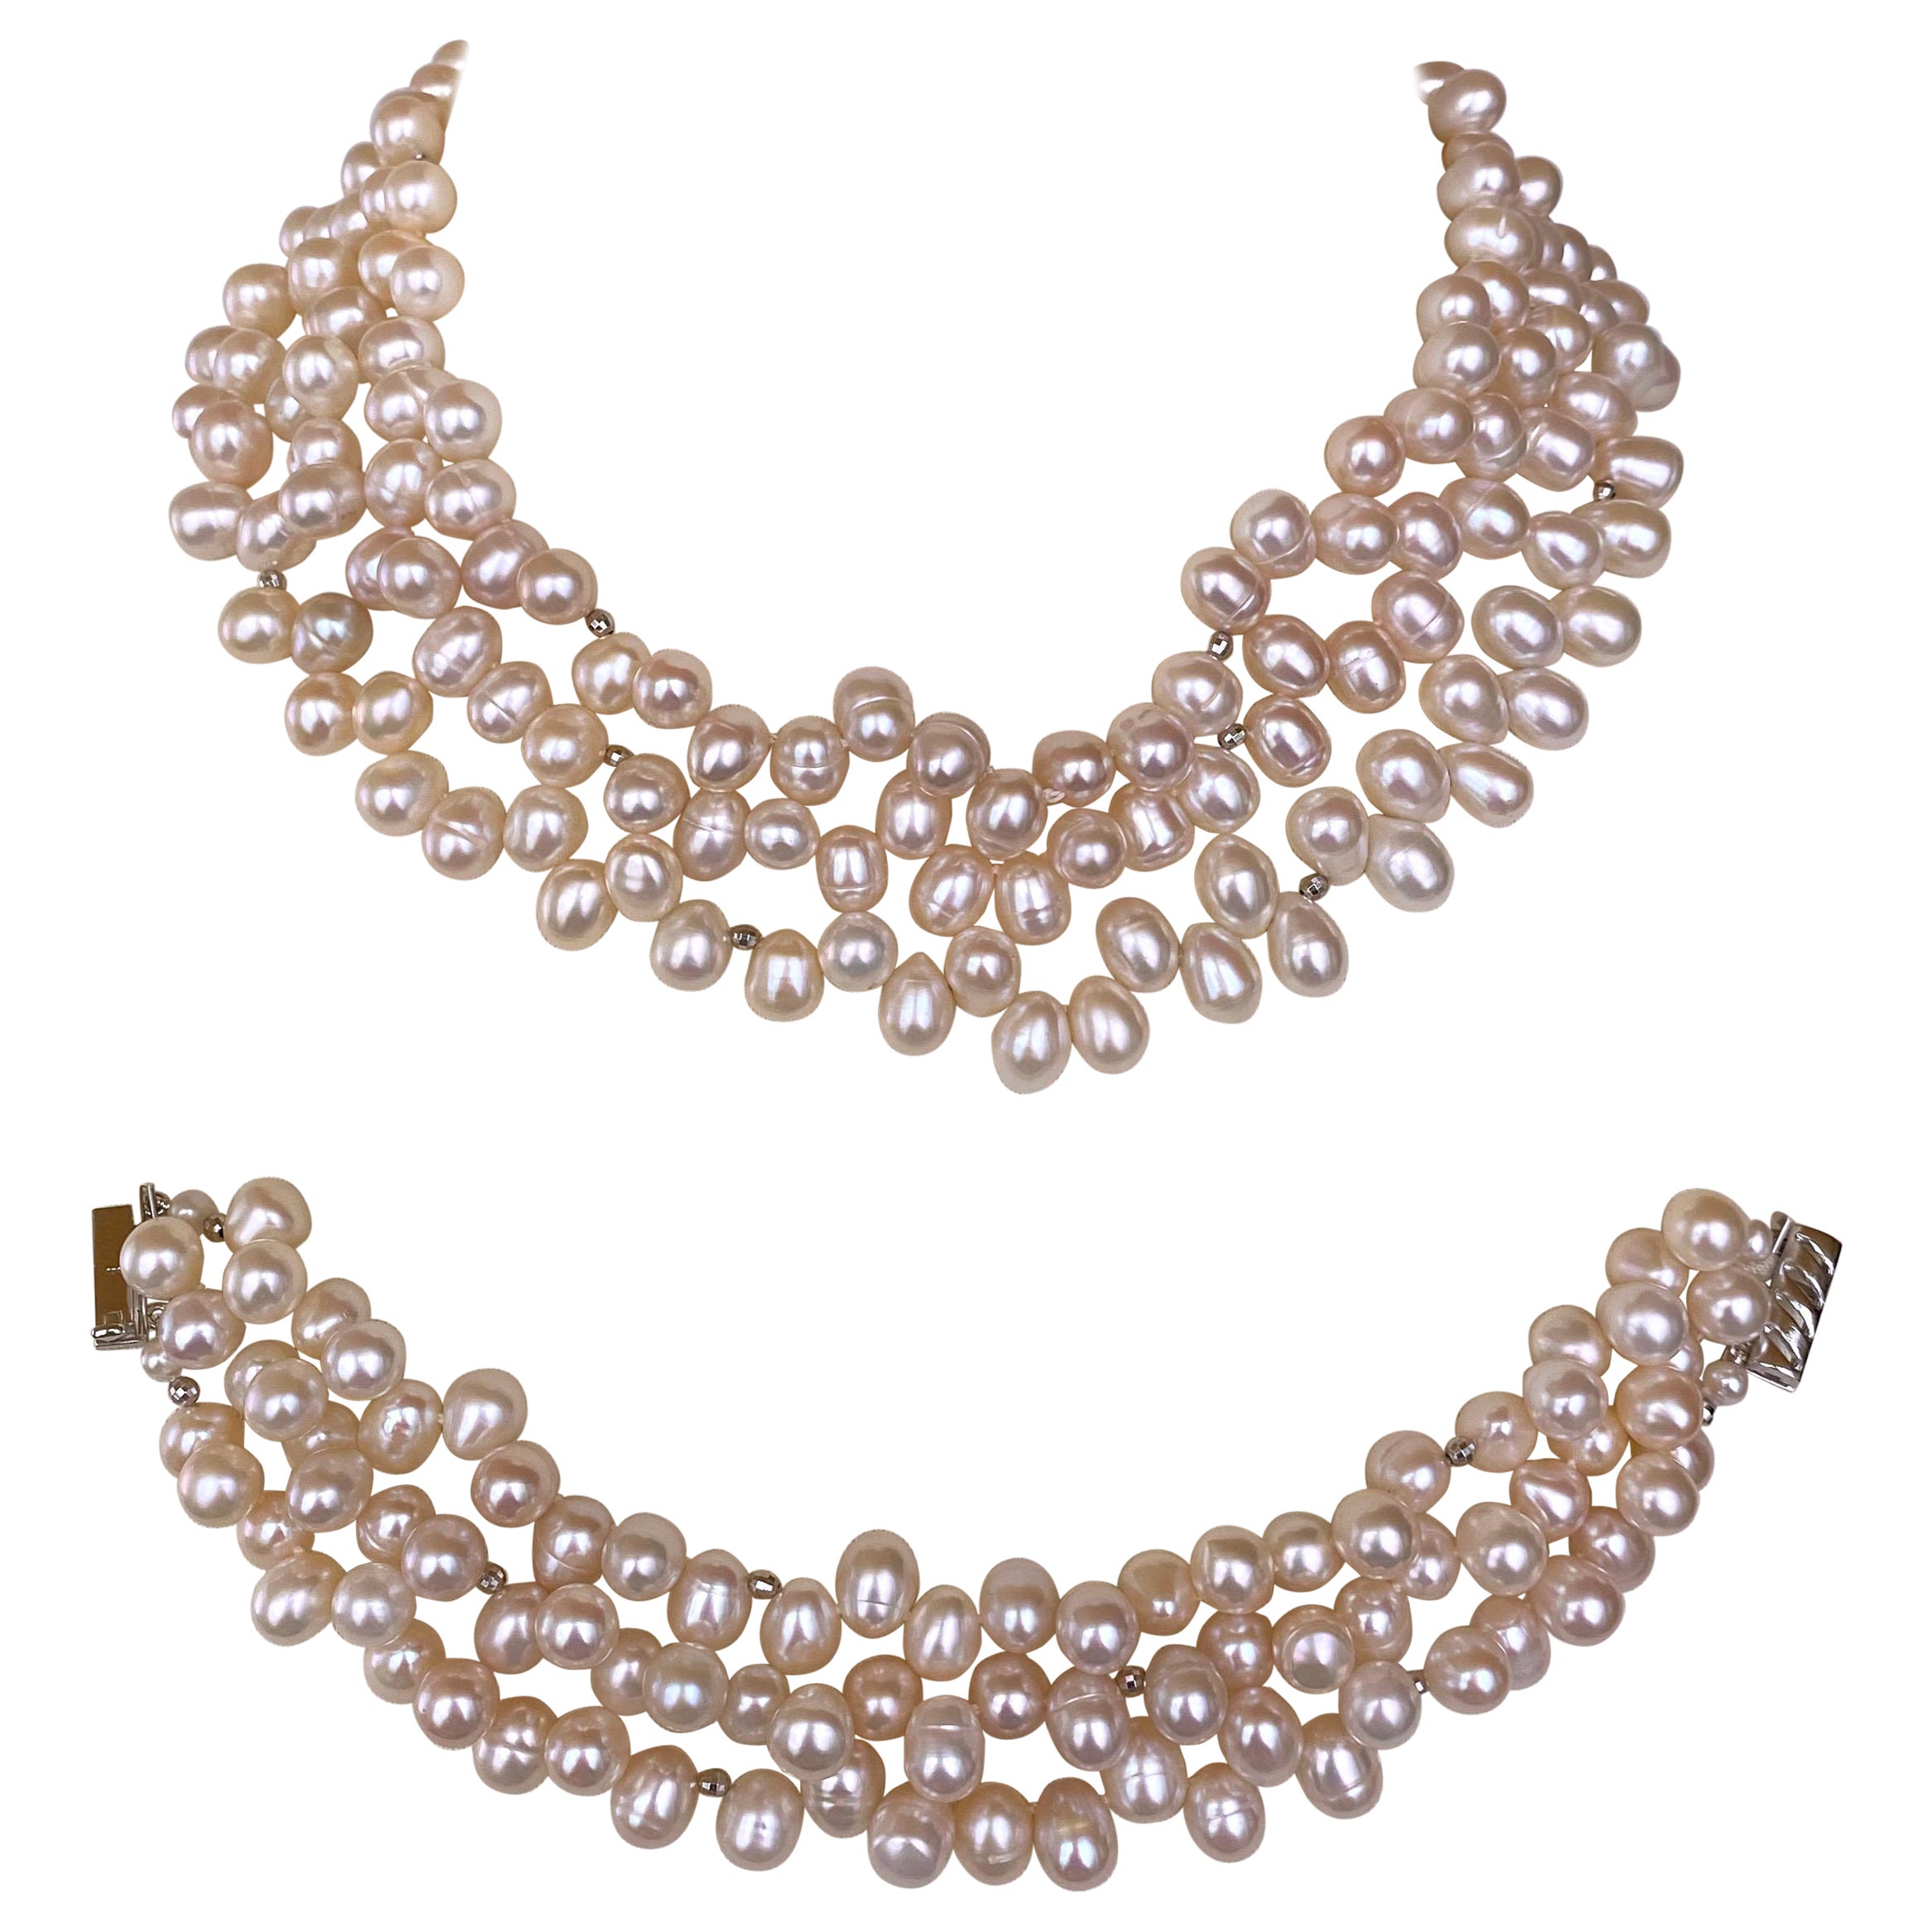 Marina J. Convertible Three in One All Pearl Necklace & Bracelet